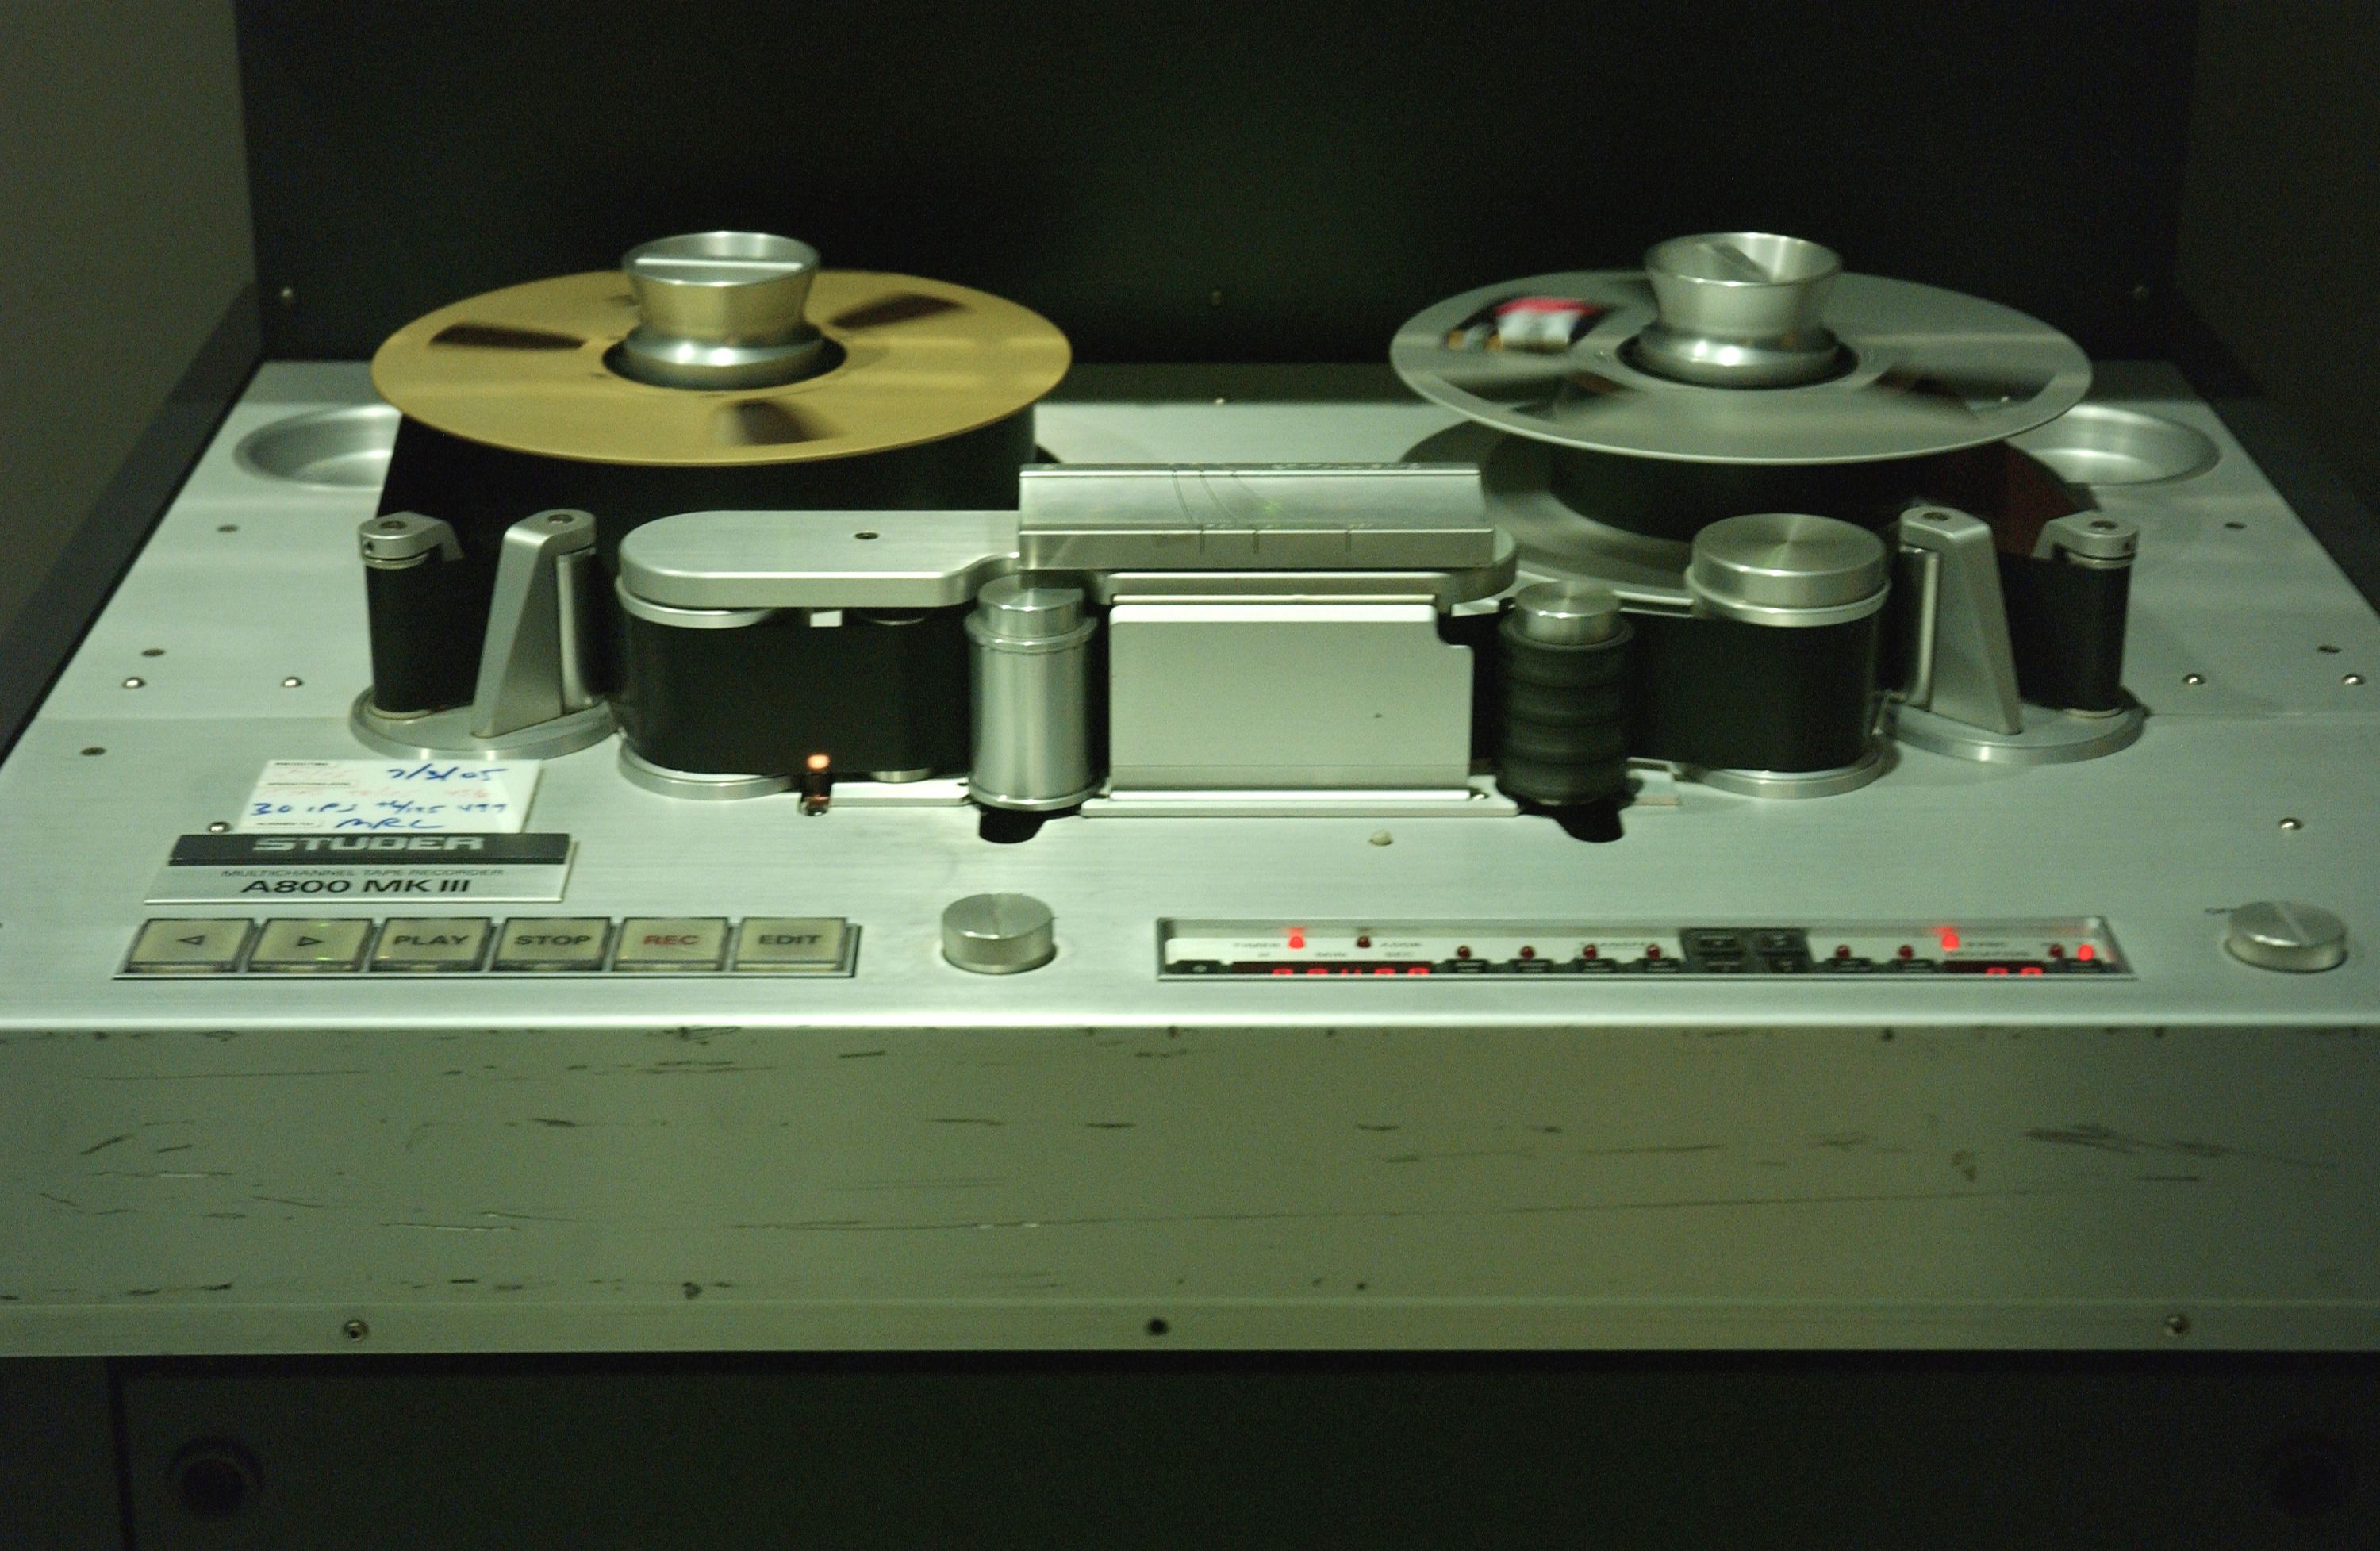 Reel-to-Reel vs. Cassette Tapes: Understanding the Difference